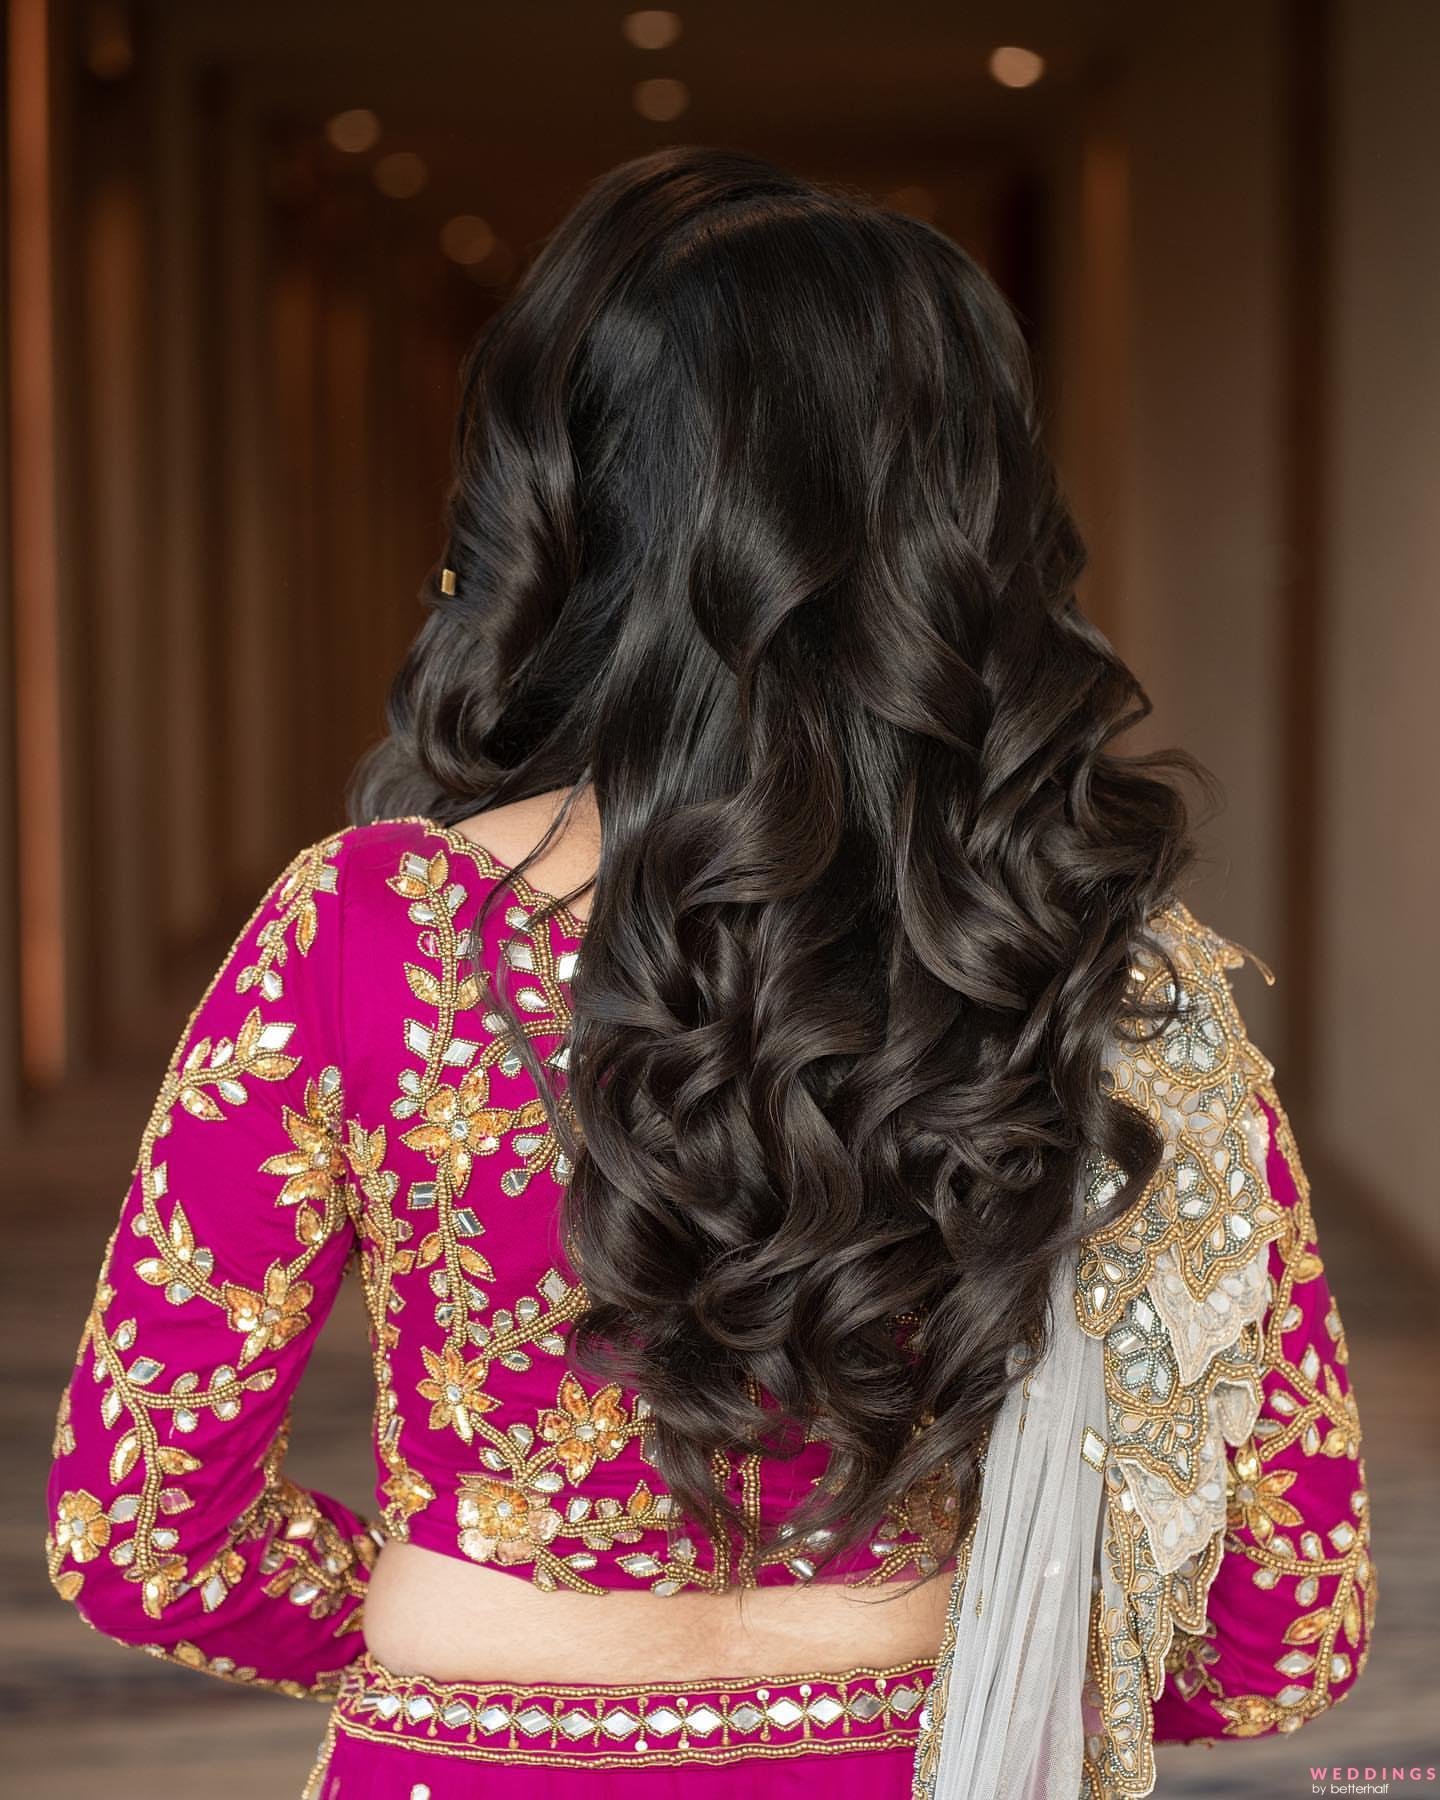 hairstyle with lehenga wedding | hairstyle with lehenga choli | hairstyle  with lehenga low buns | Indian wedding hairstyles, Indian hairstyles, Lehenga  hairstyles